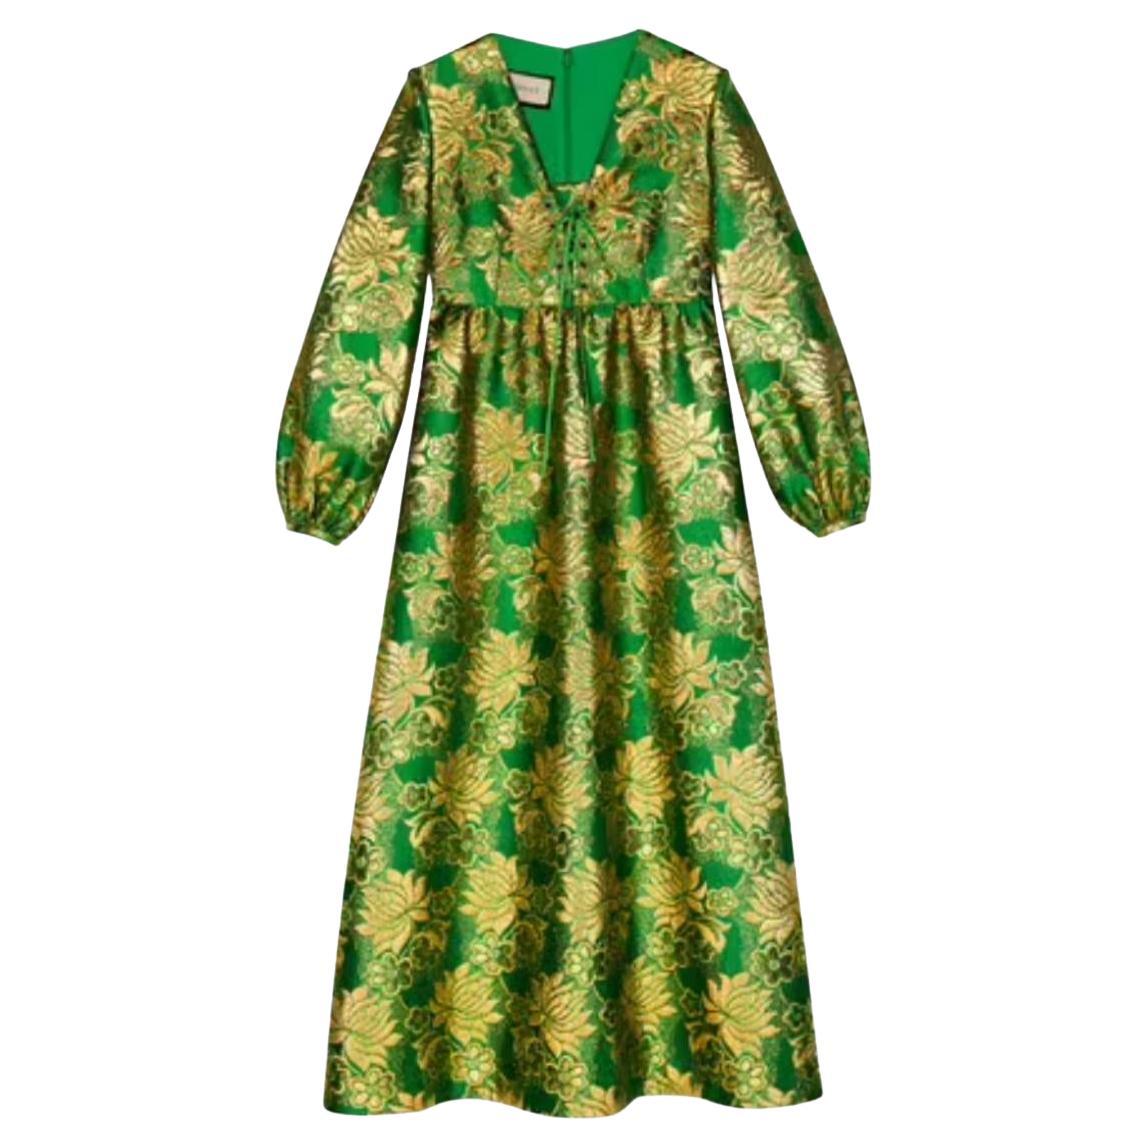 Discover 76+ gucci gown sale best